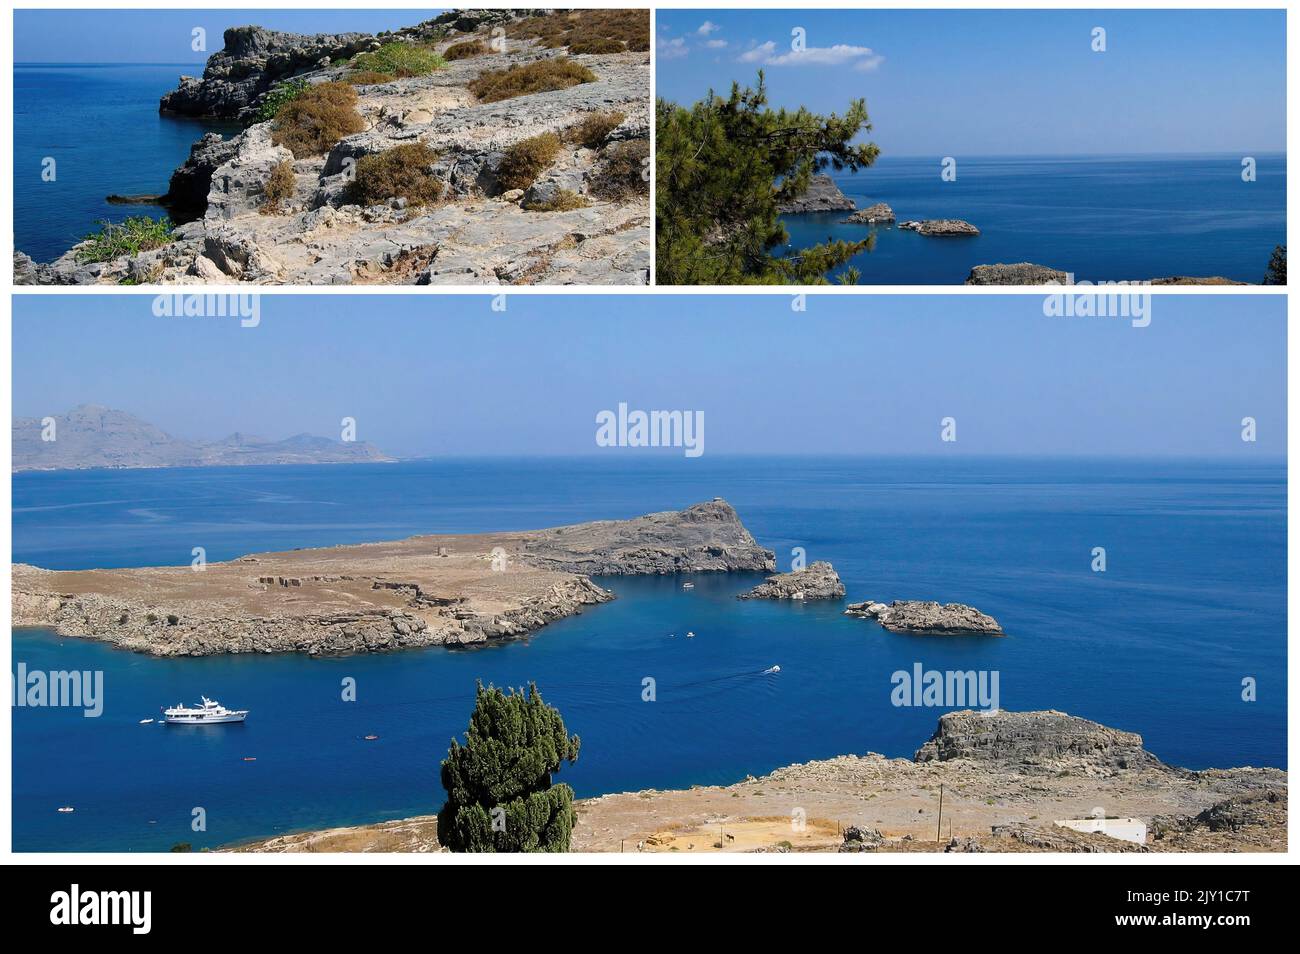 The island of Rhodes ln Greece, with its crystal clear sea and its archaeological sites is one of the most important European tourist destinations Stock Photo